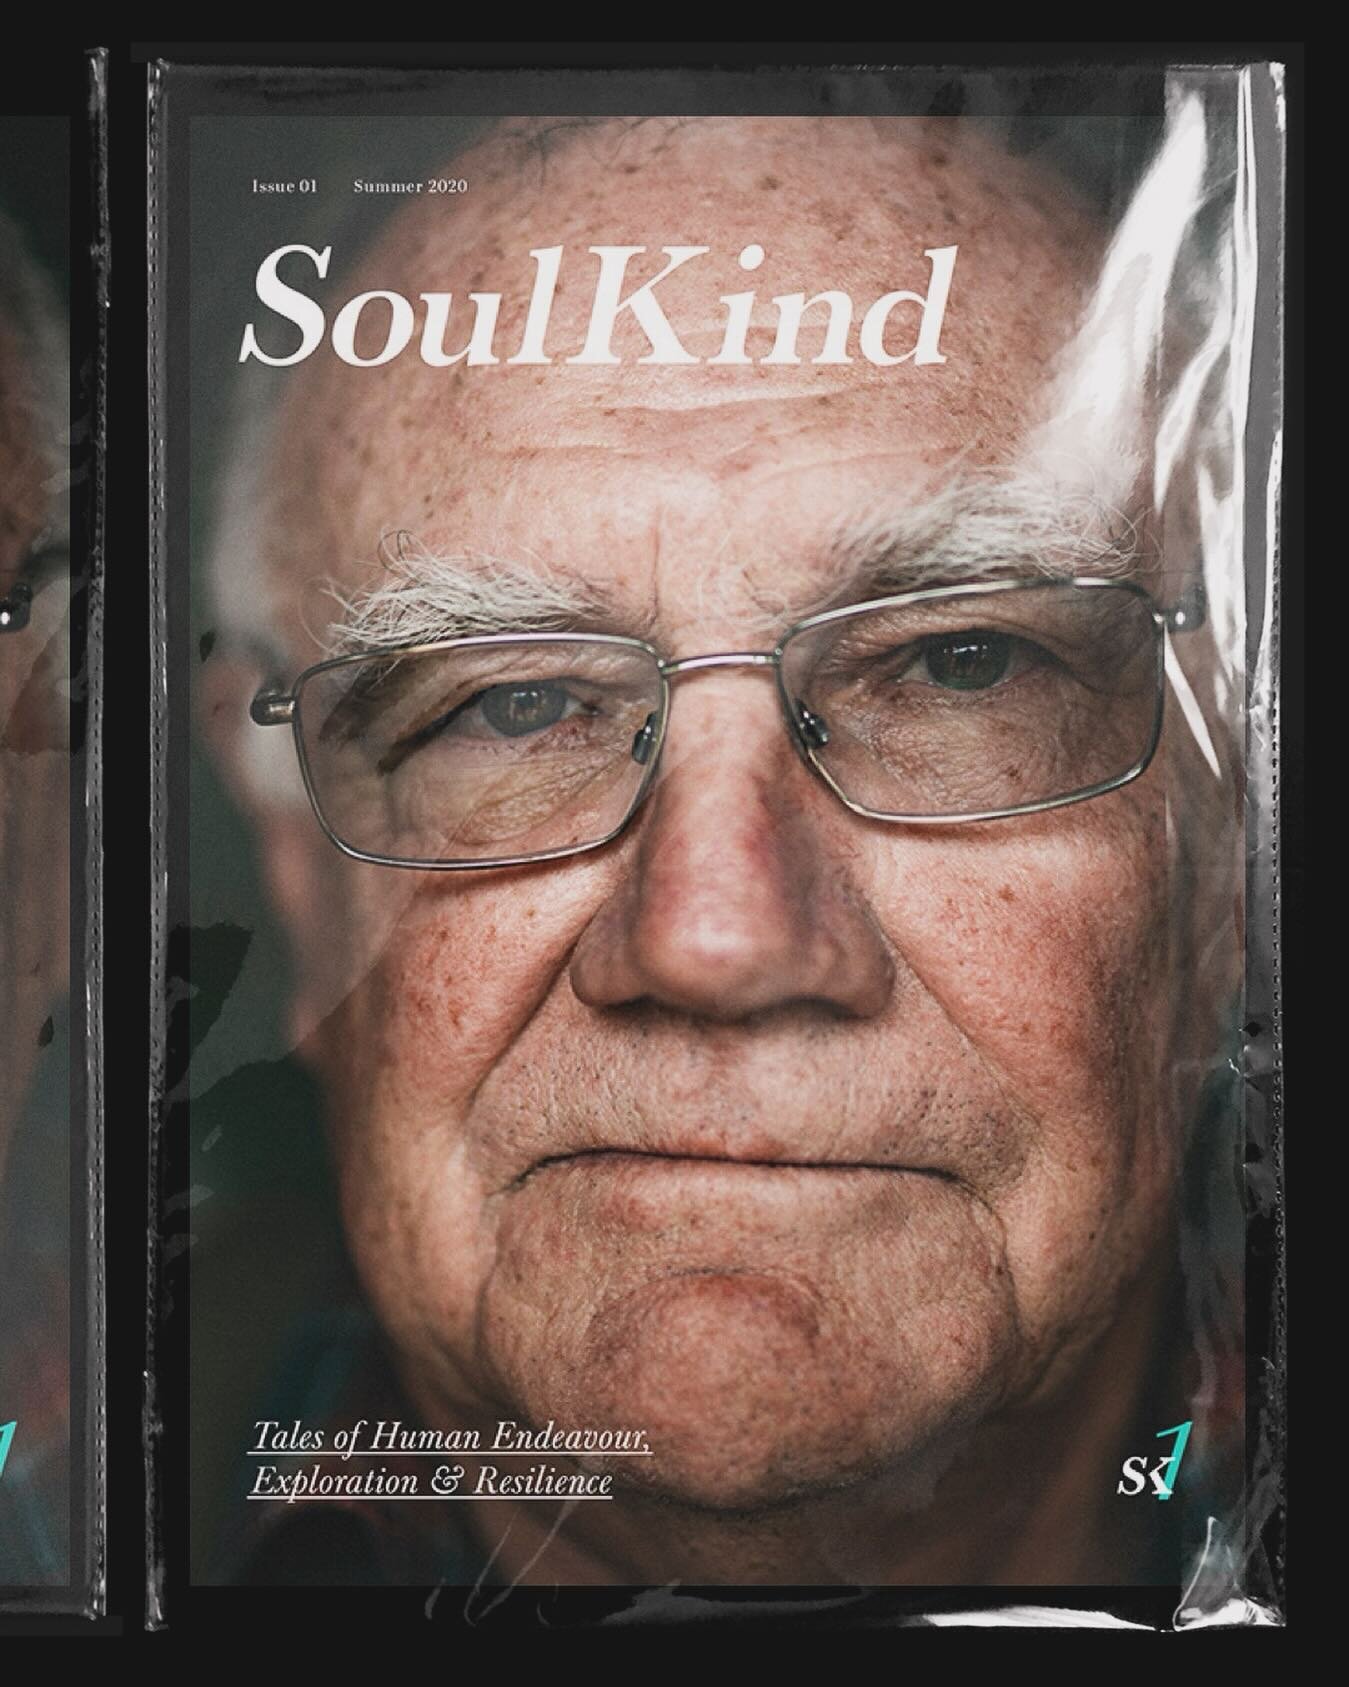 SoulKind issue 1
Just a few copies left &hellip; 👀
Orders at soulkindpeople.co.uk
&bull;
&bull;
&bull;
&bull;
&bull;
#mindset #resilience #positivity #perseverence #adventure #exploration #endeavour #journal #print  #worklife #motivation #positiveth